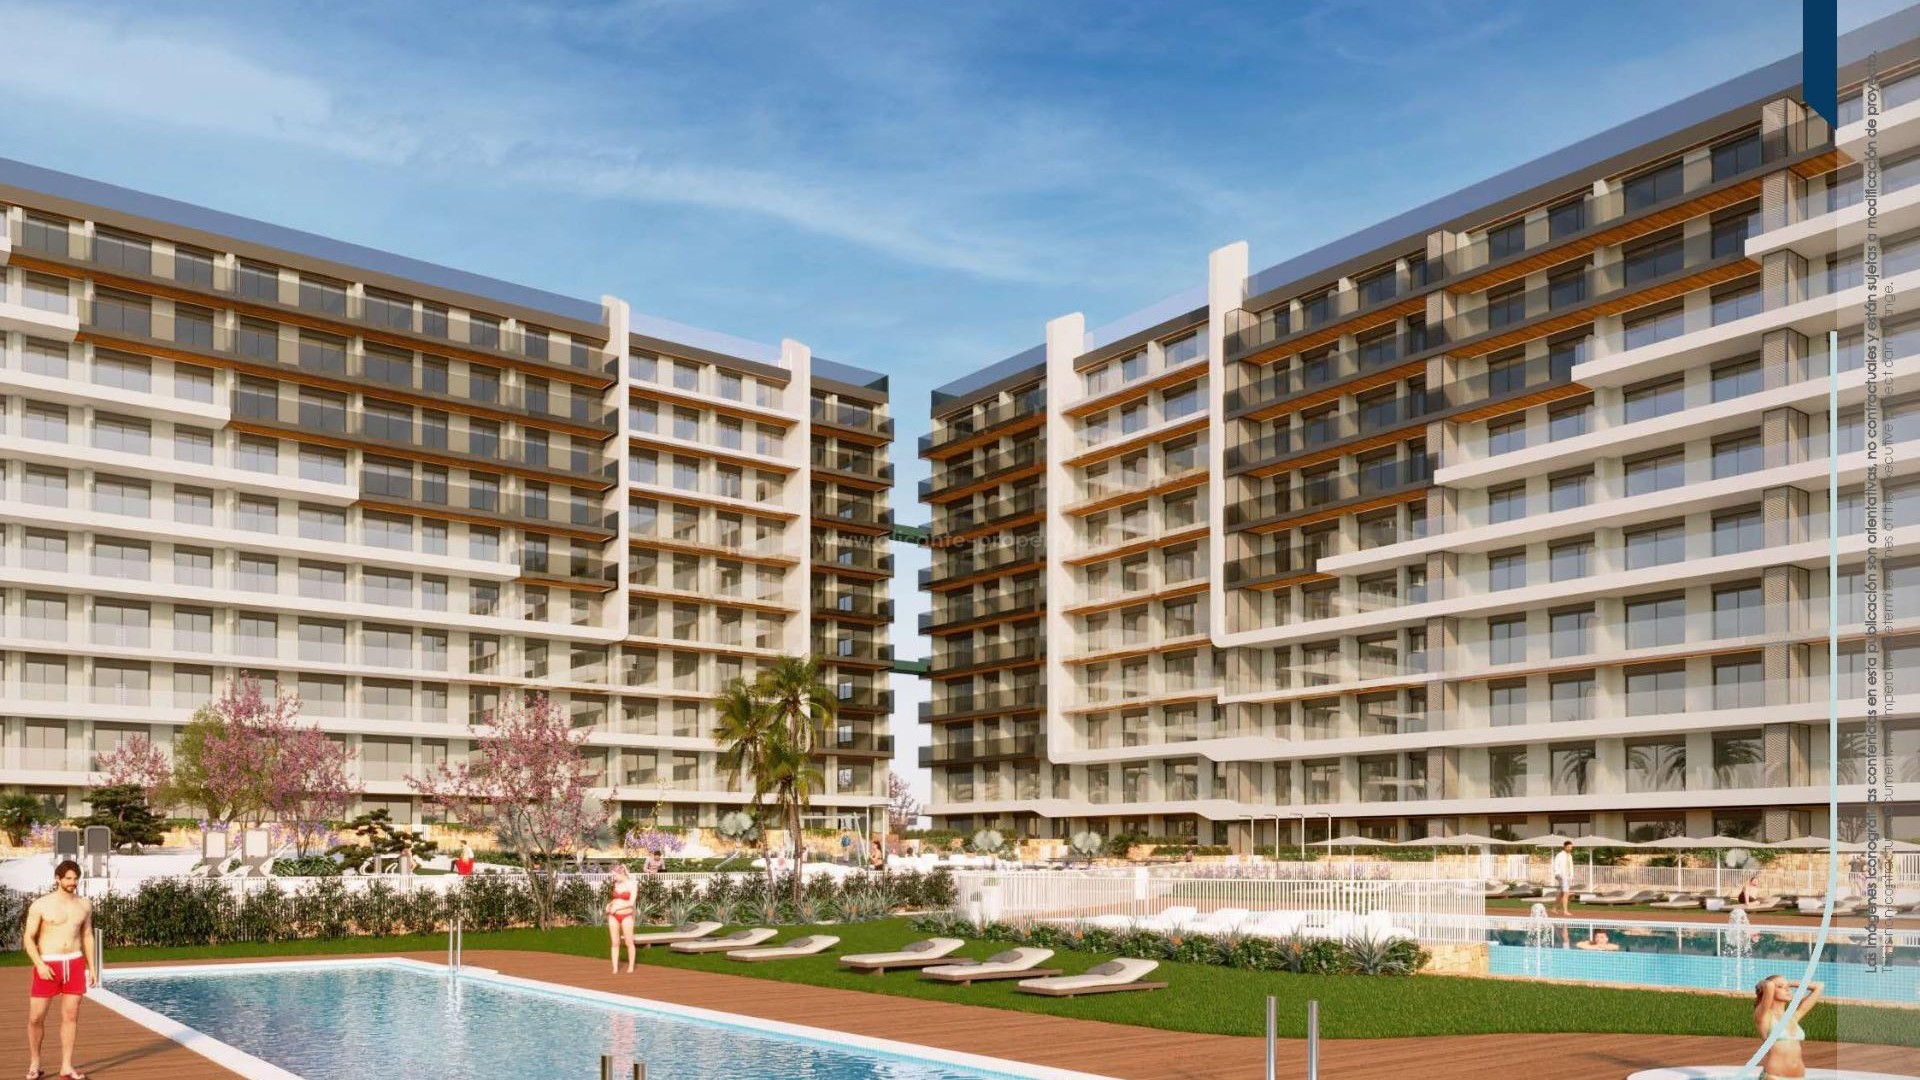 New residential complex with 220 apartments in Punta Prima, 2/3 bedrooms, 2 bathrooms, terrace, garden areas with swimming pools and paddle tennis court